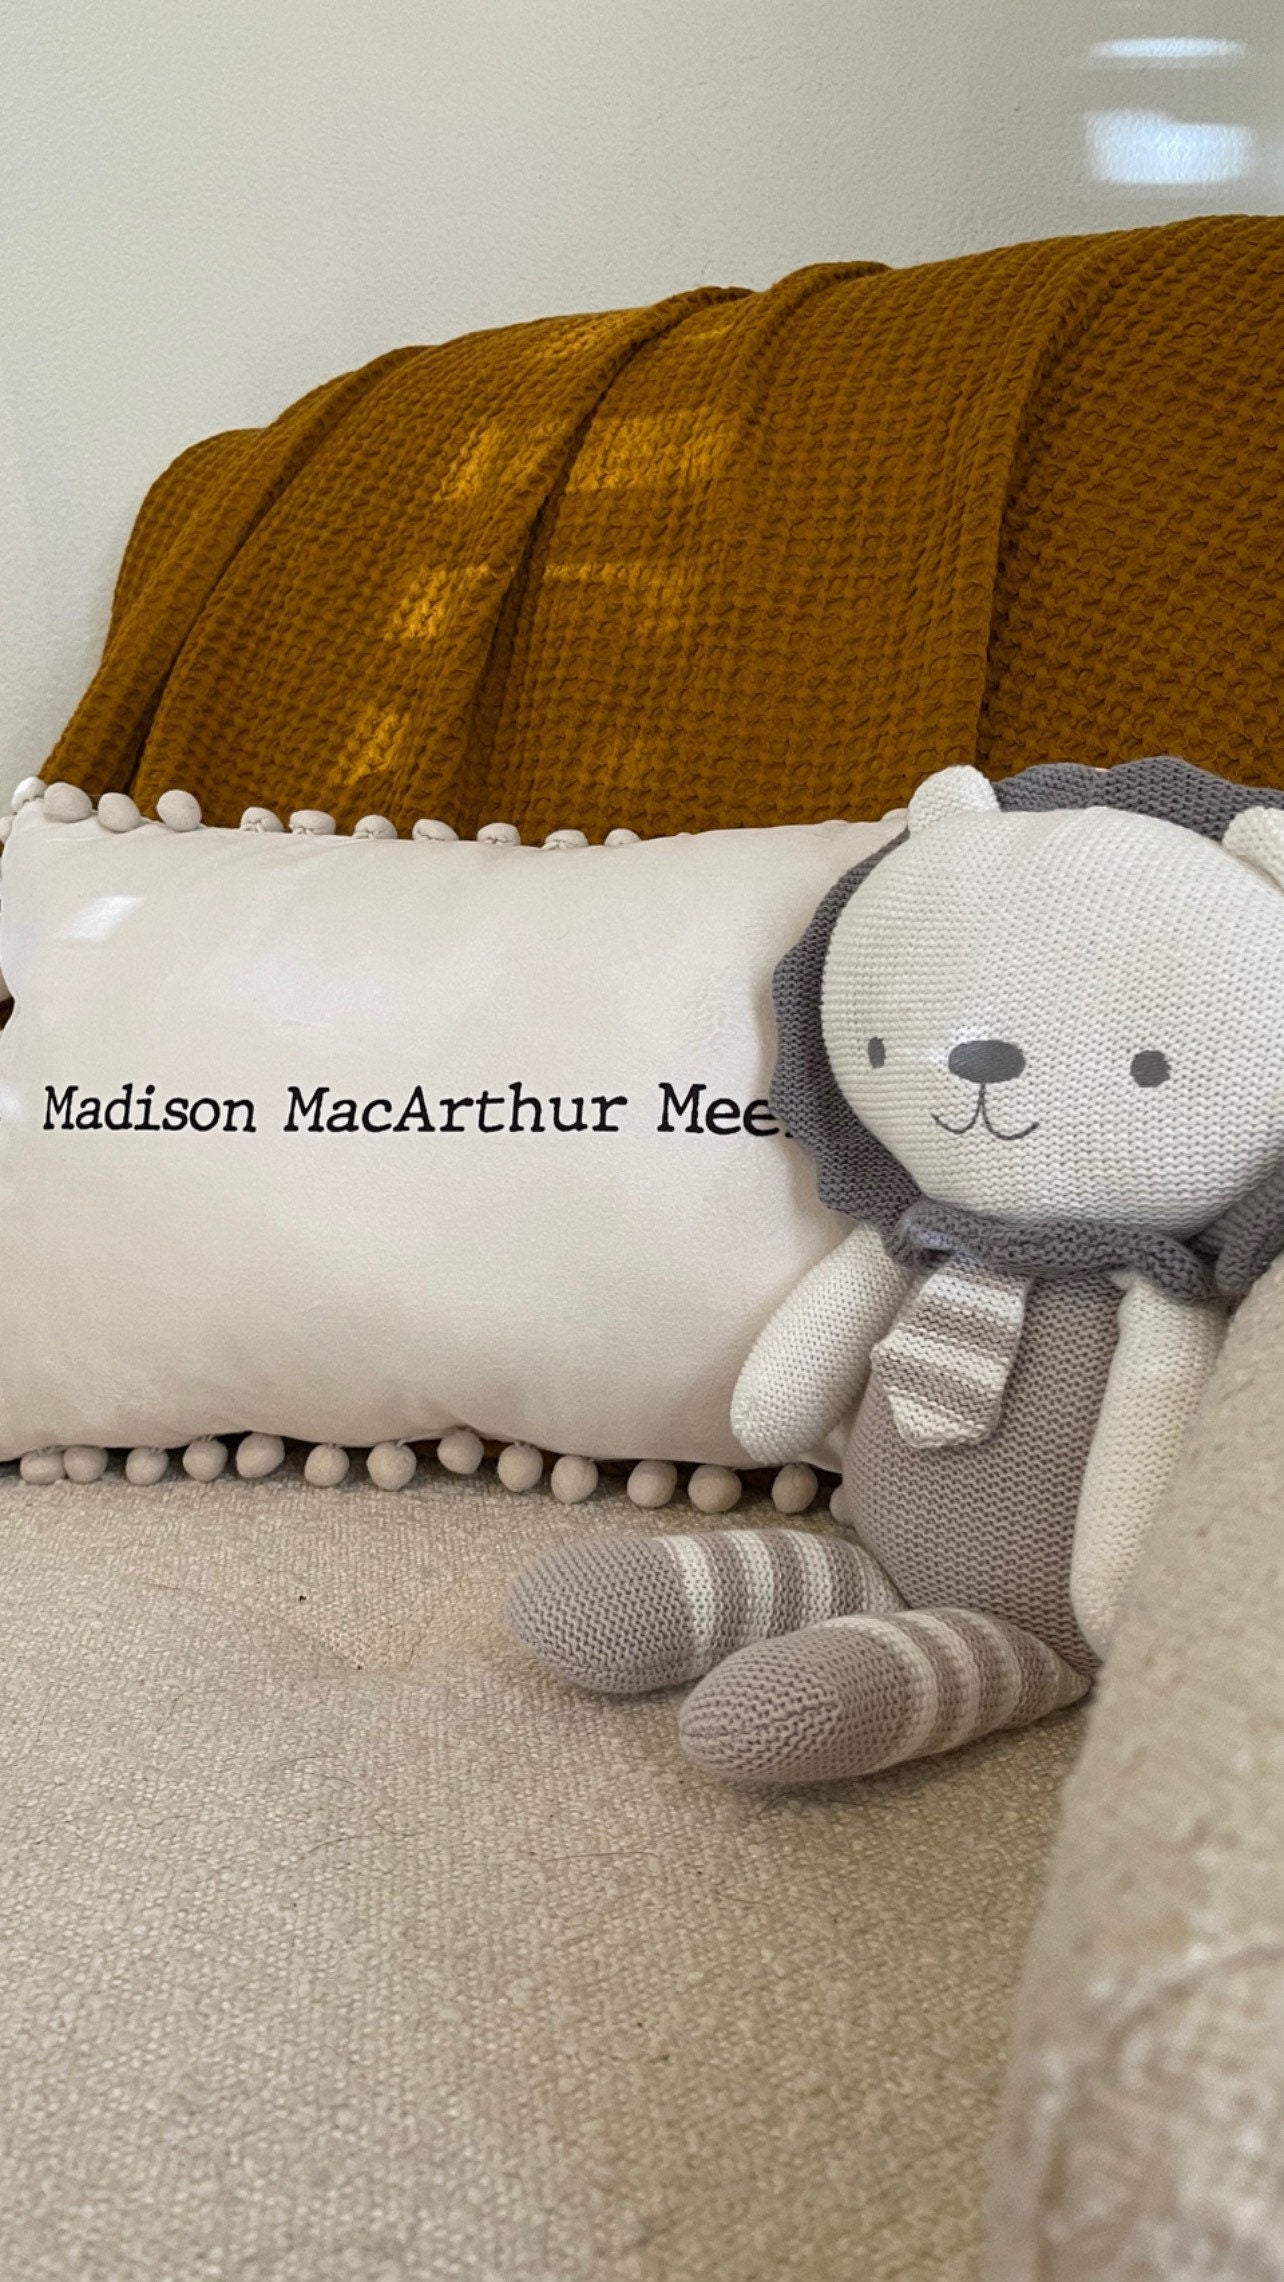 Baby Personalized pillow, customize pillow words and letters